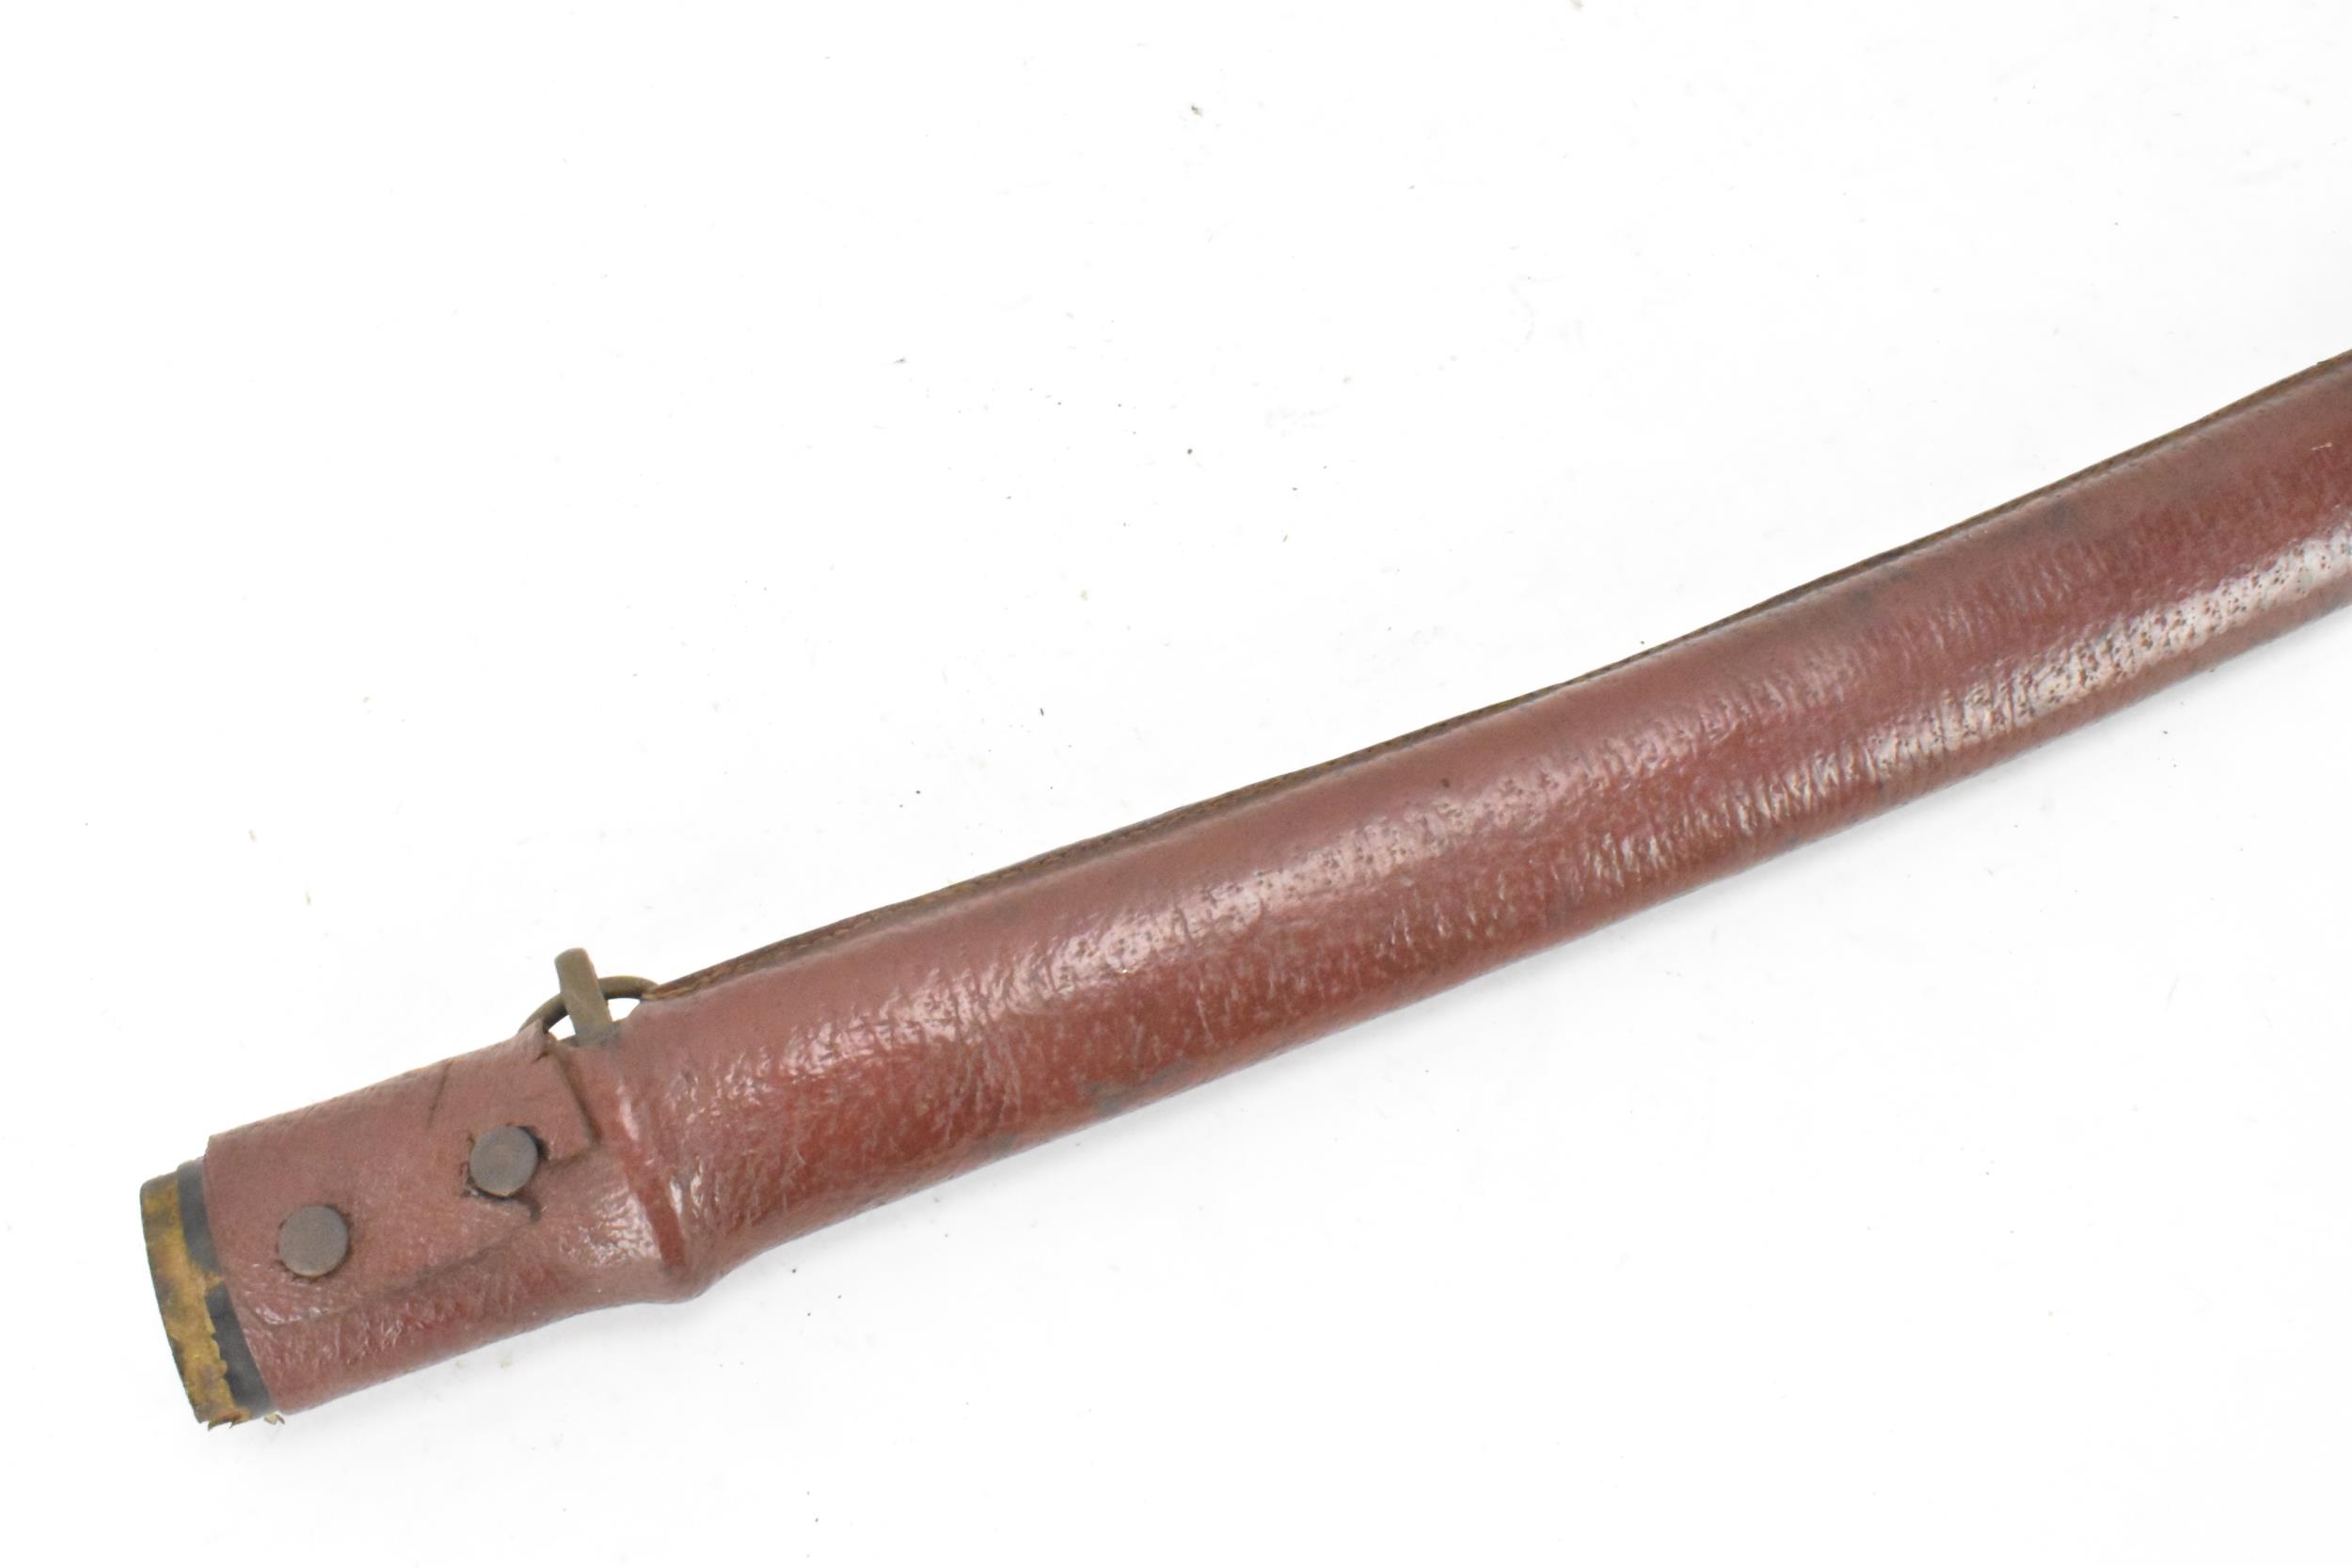 A WWII Japanese officers Katana sword and scabbard, both bound in red leather, steel blade, - Image 11 of 14